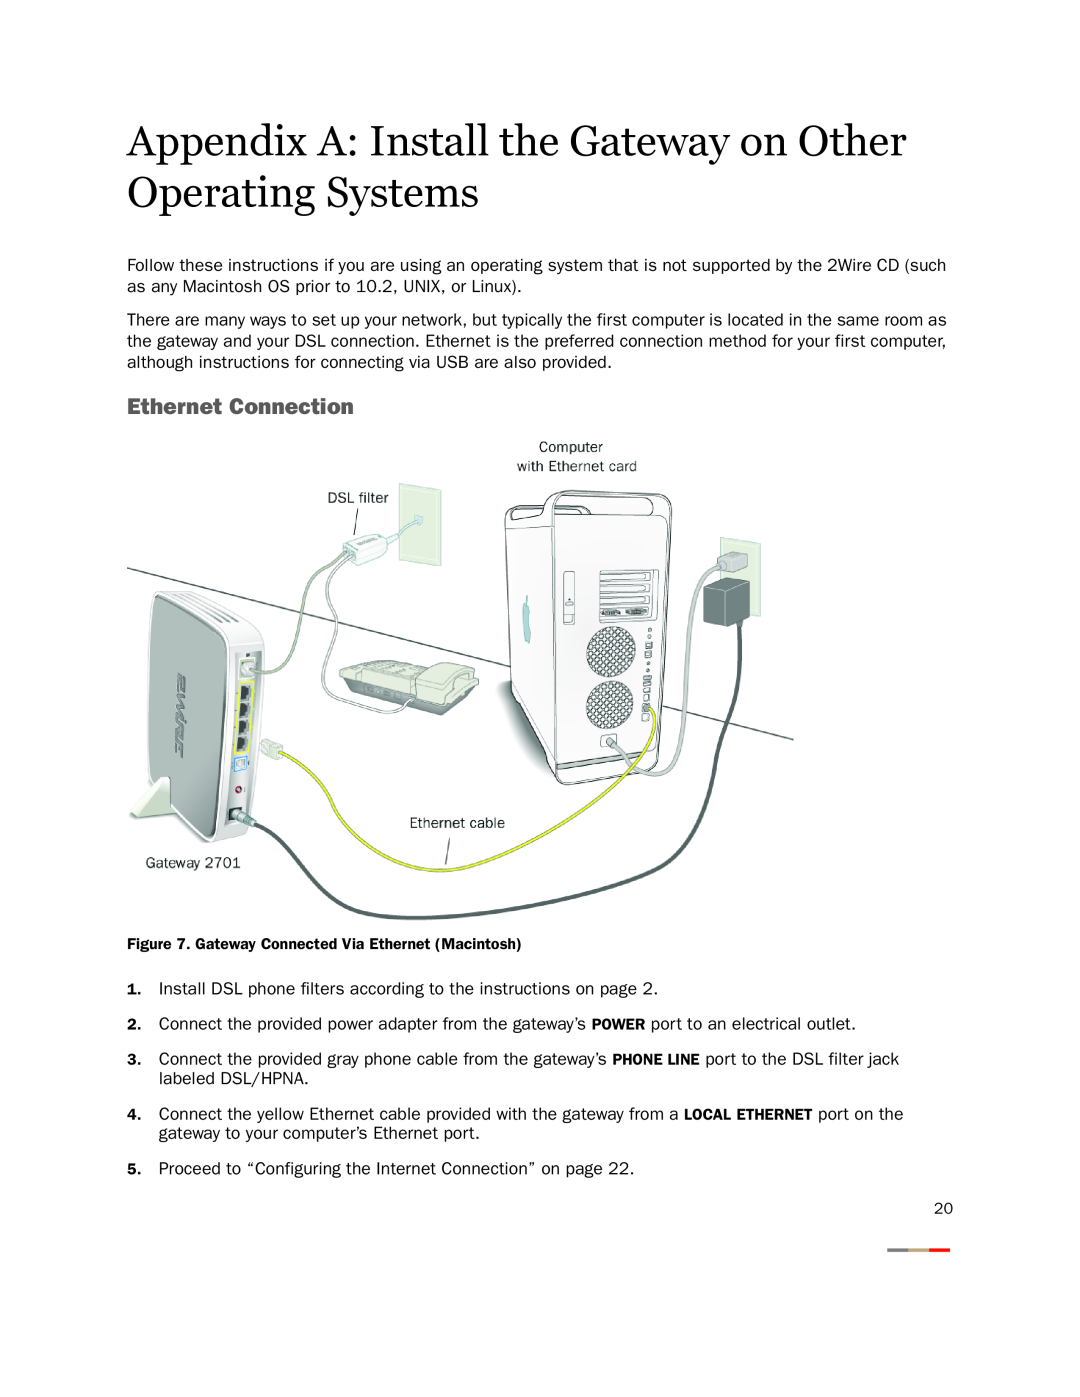 Gateway 2701HG-B manual Appendix A Install the Gateway on Other Operating Systems, Ethernet Connection 